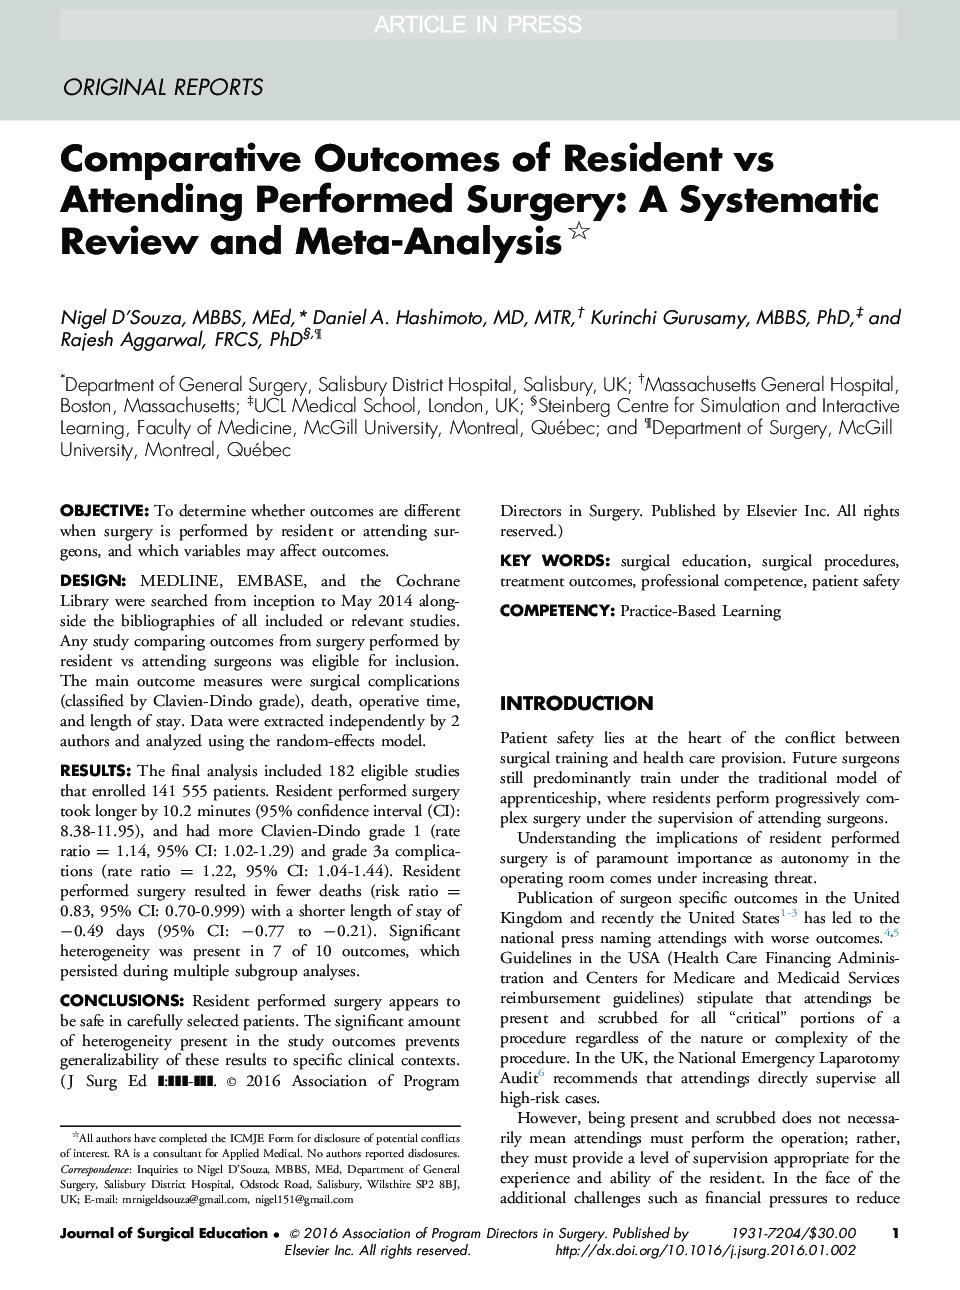 Comparative Outcomes of Resident vs Attending Performed Surgery: A Systematic Review and Meta-Analysis